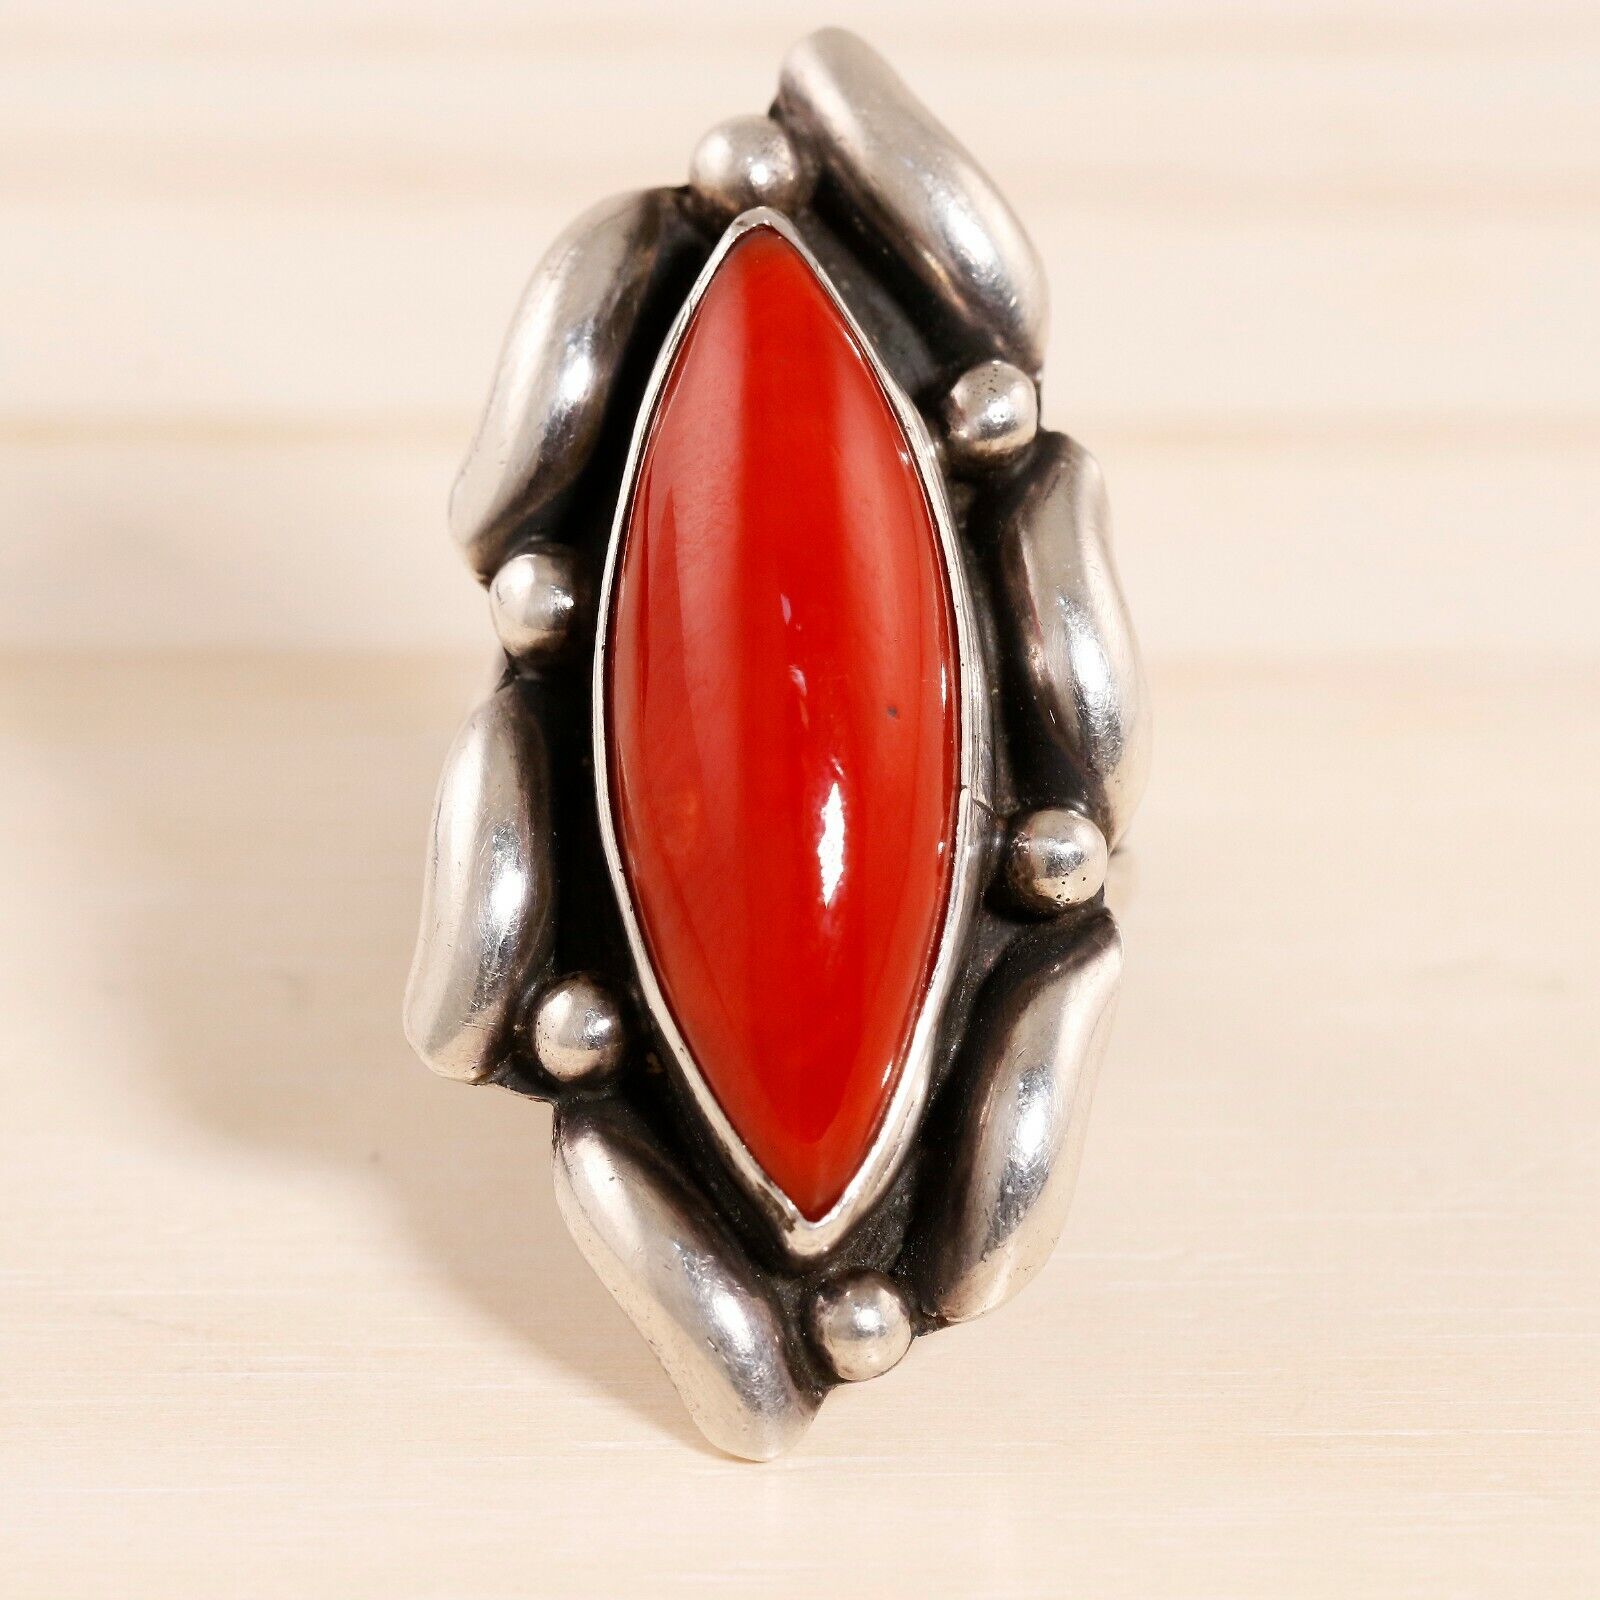 LARGE NATIVE AMERICAN STERLING POINTED OVAL OX BLOOD MEDITERRANEAN CORAL RING